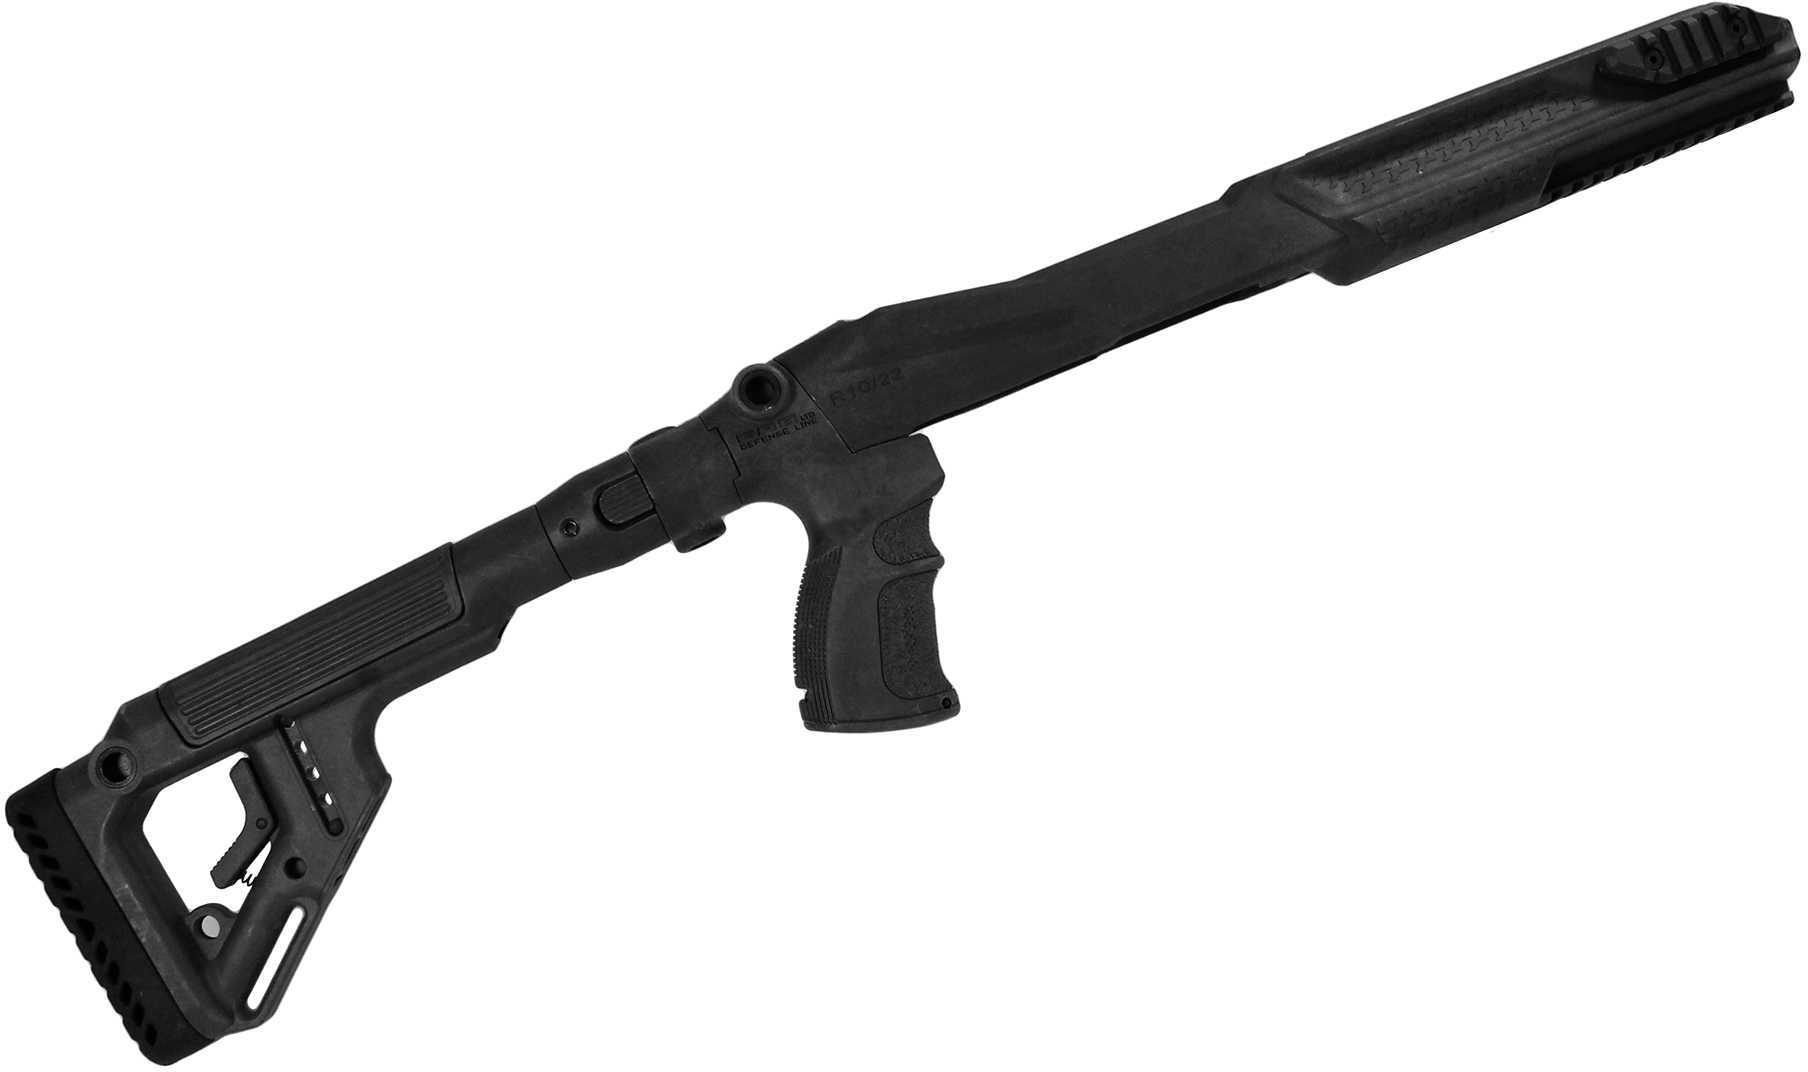 FAB Defense Stock Fits Ruger 10/22 Bench-rest and Buttstock Black Finish UAS R10/22